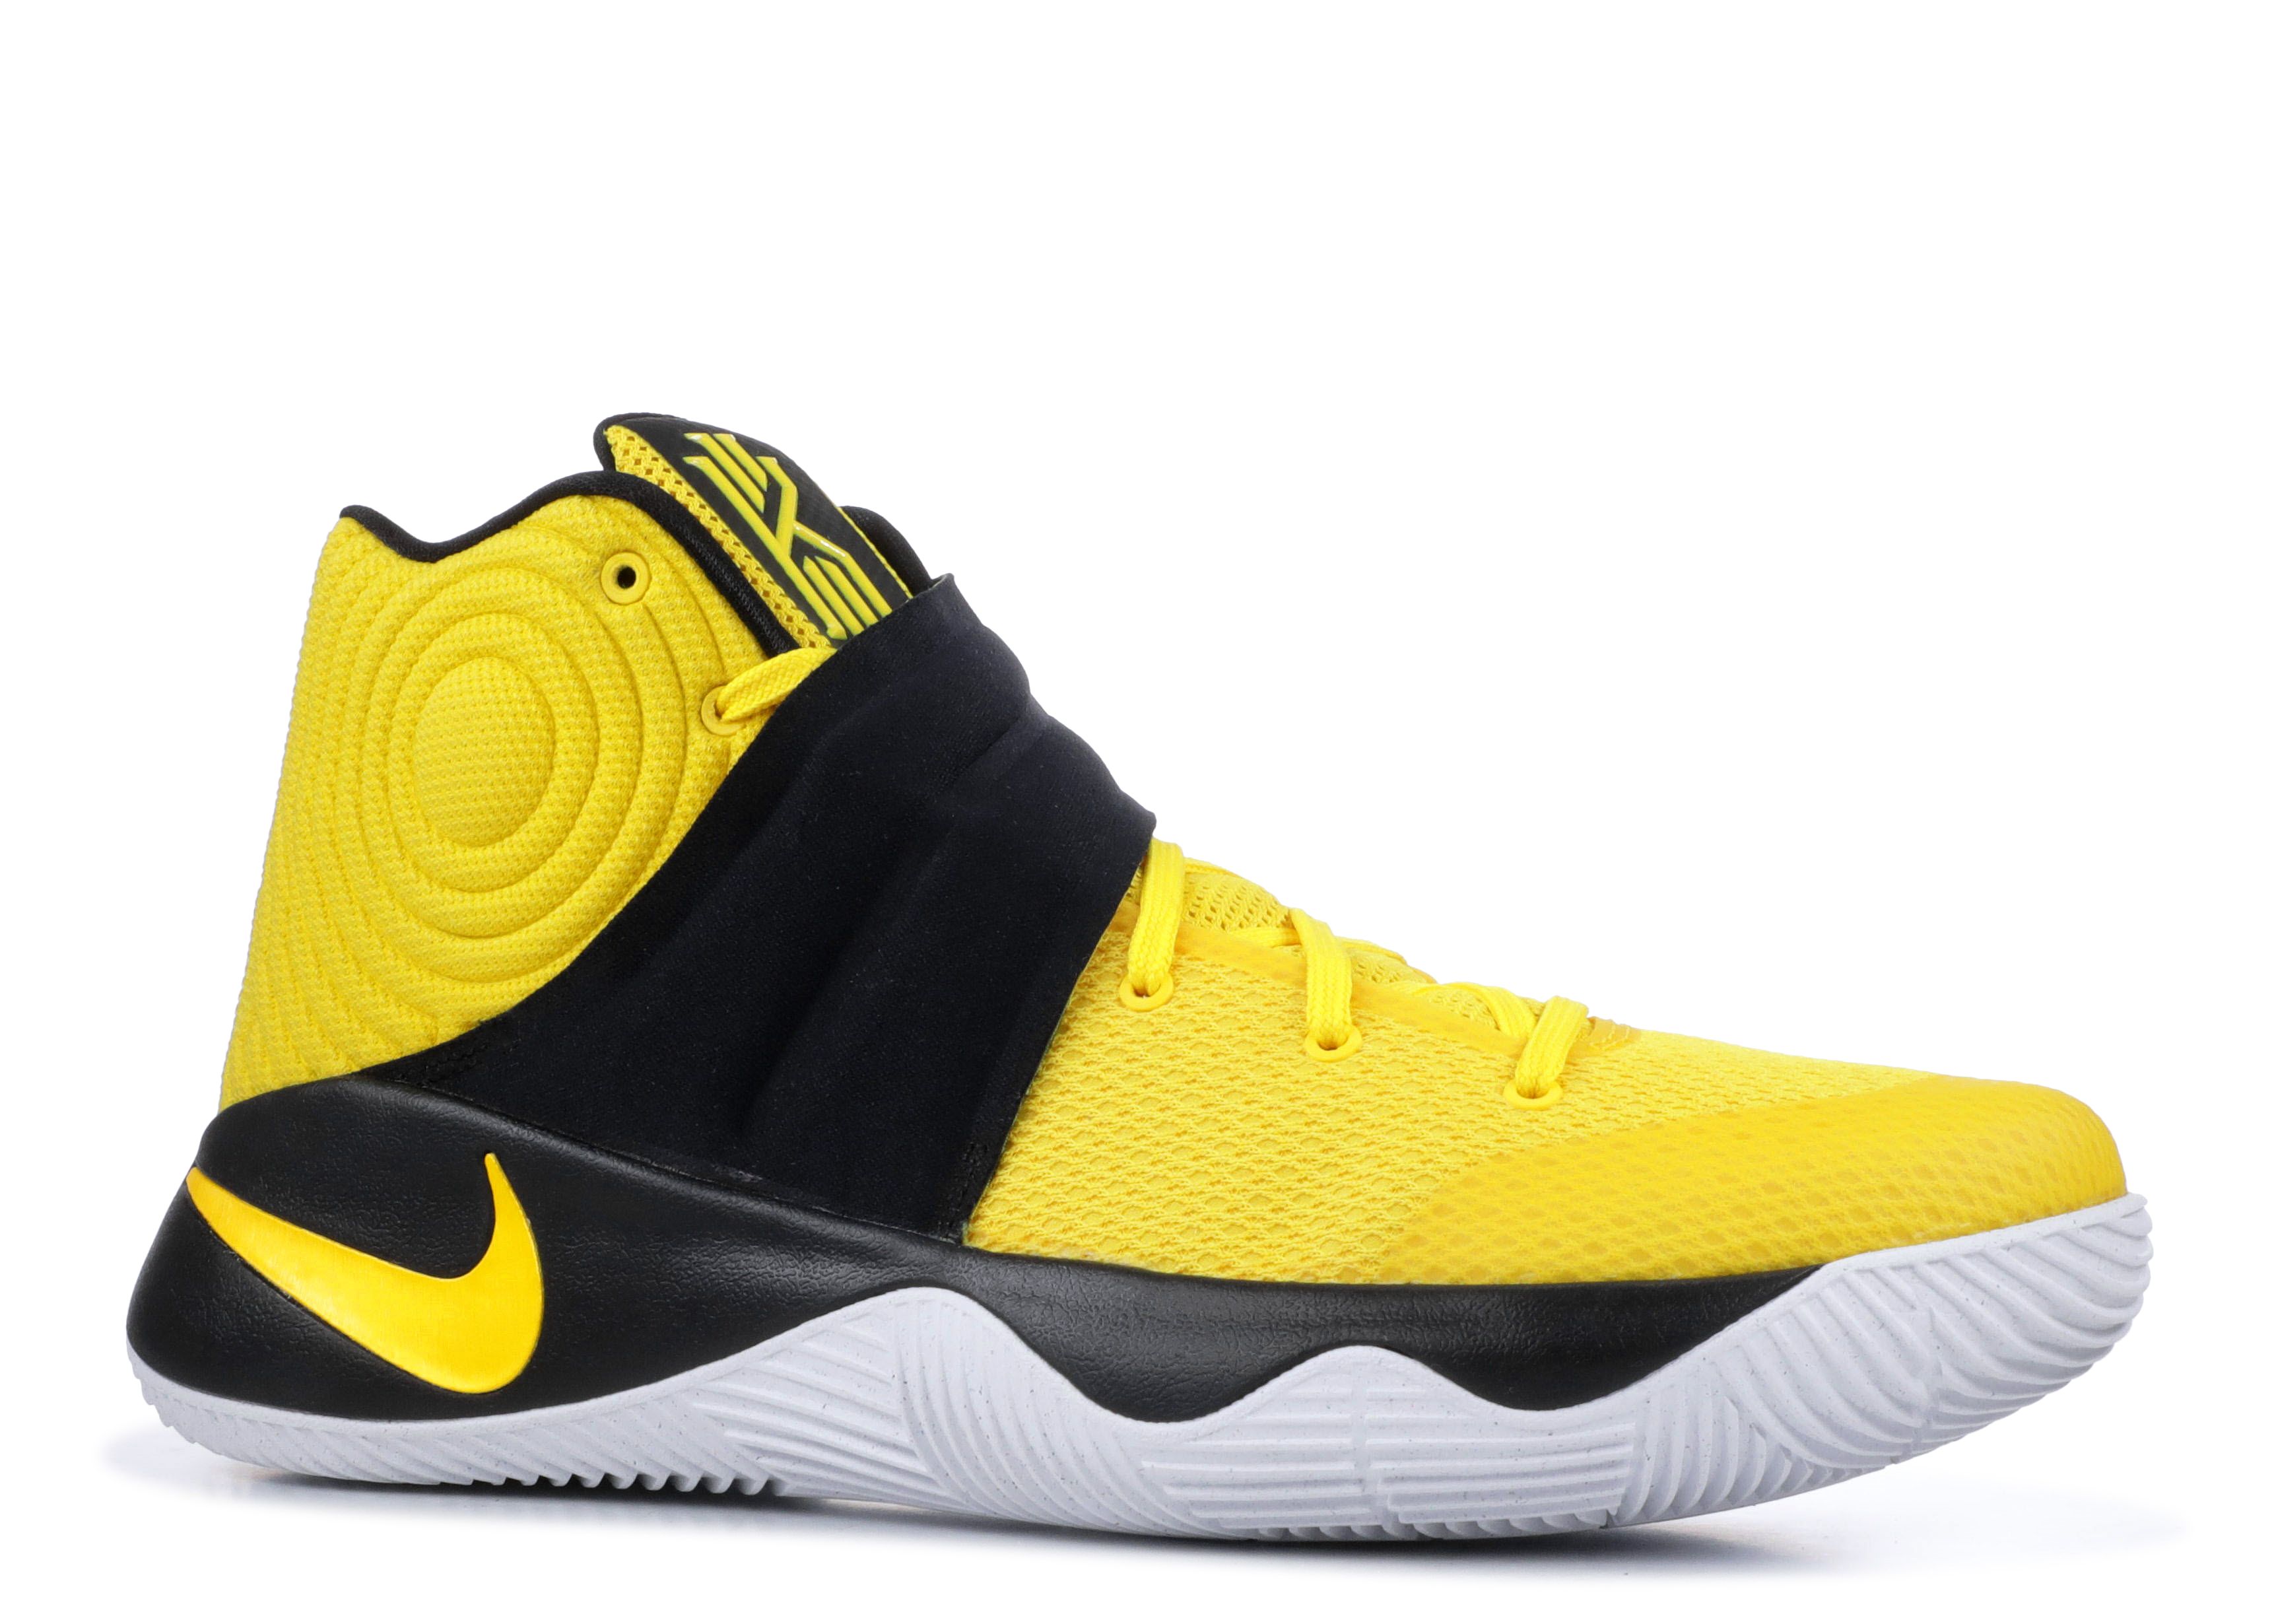 kyrie 2 yellow